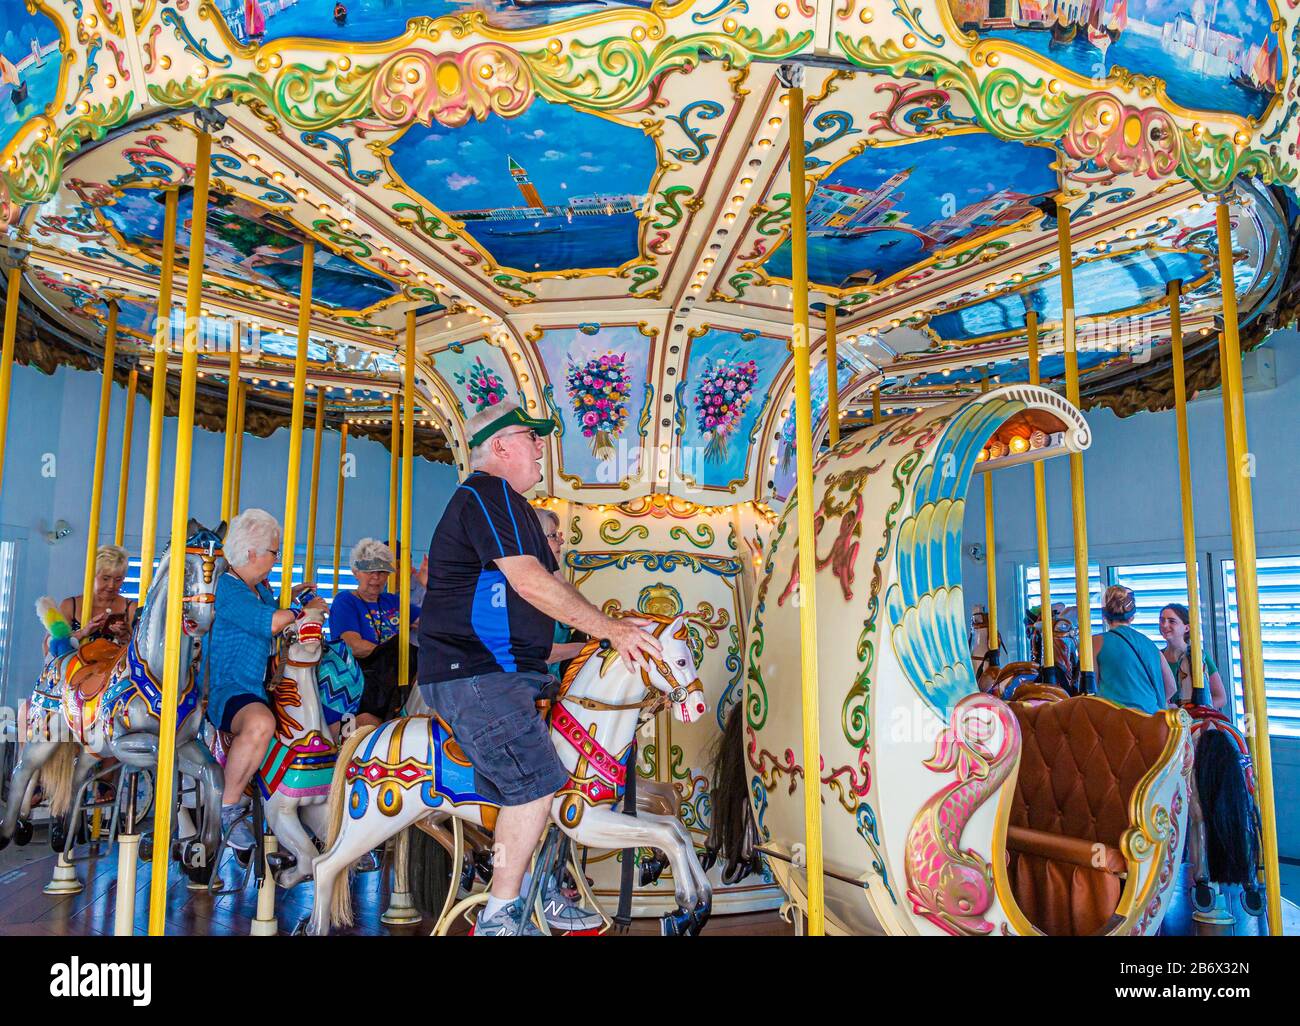 Elderly People Enjoying a Ride on a Merry Go Round on St Martin